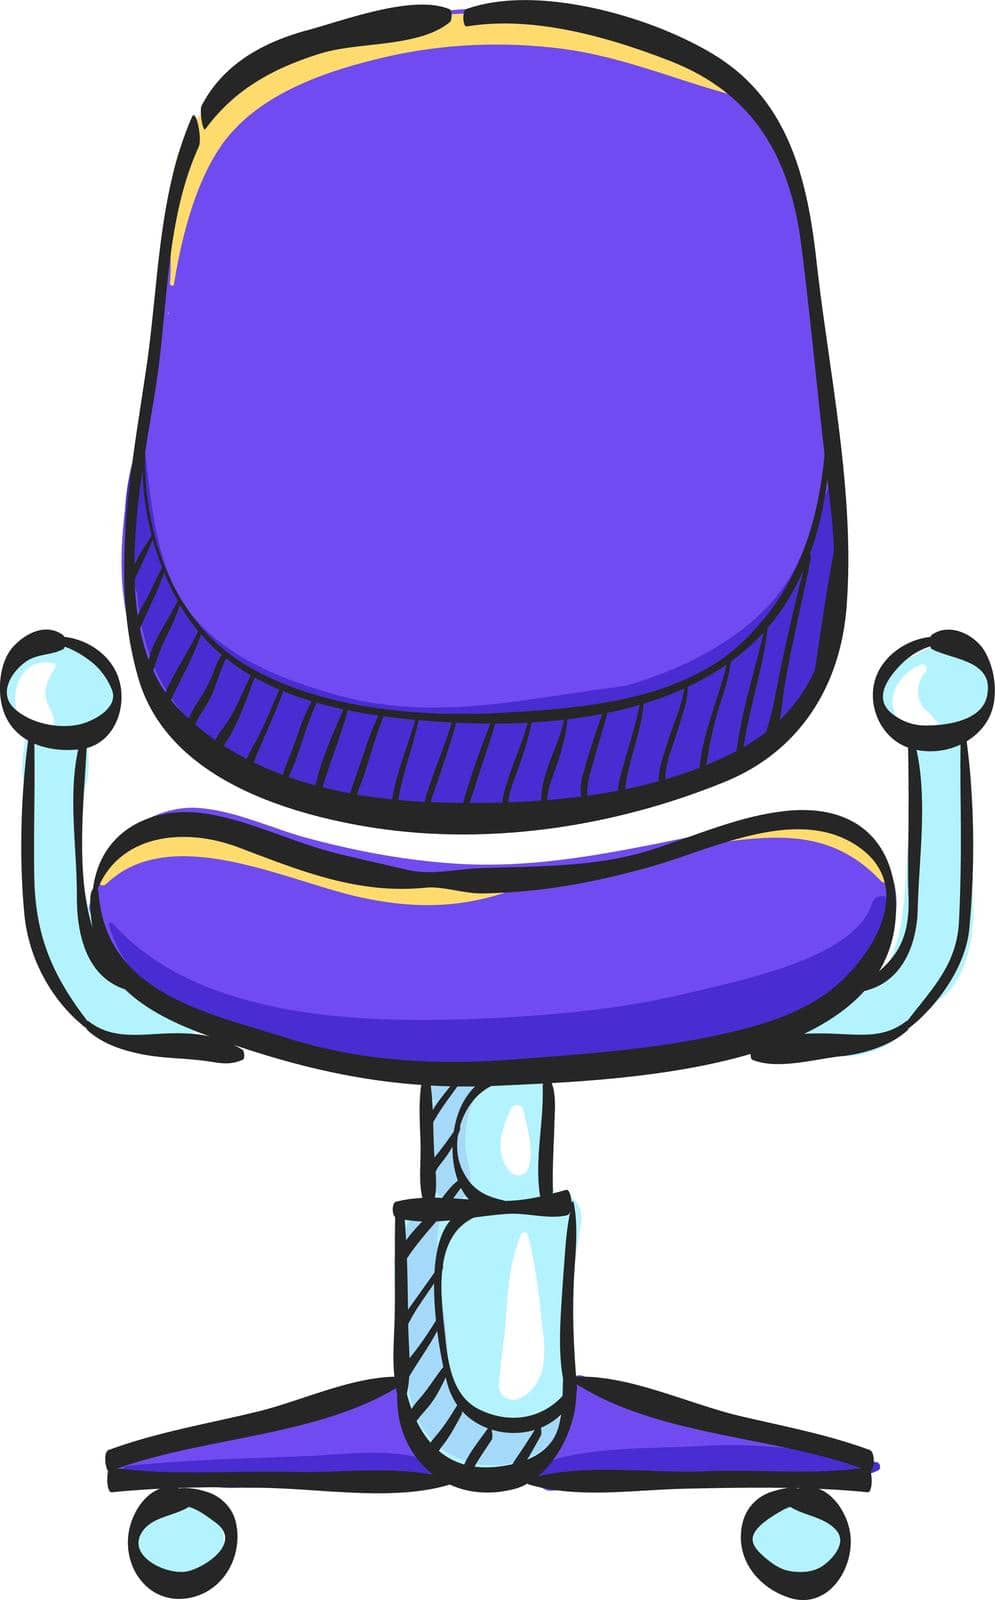 Office chair icon in color drawing. Business supply furniture comfort work